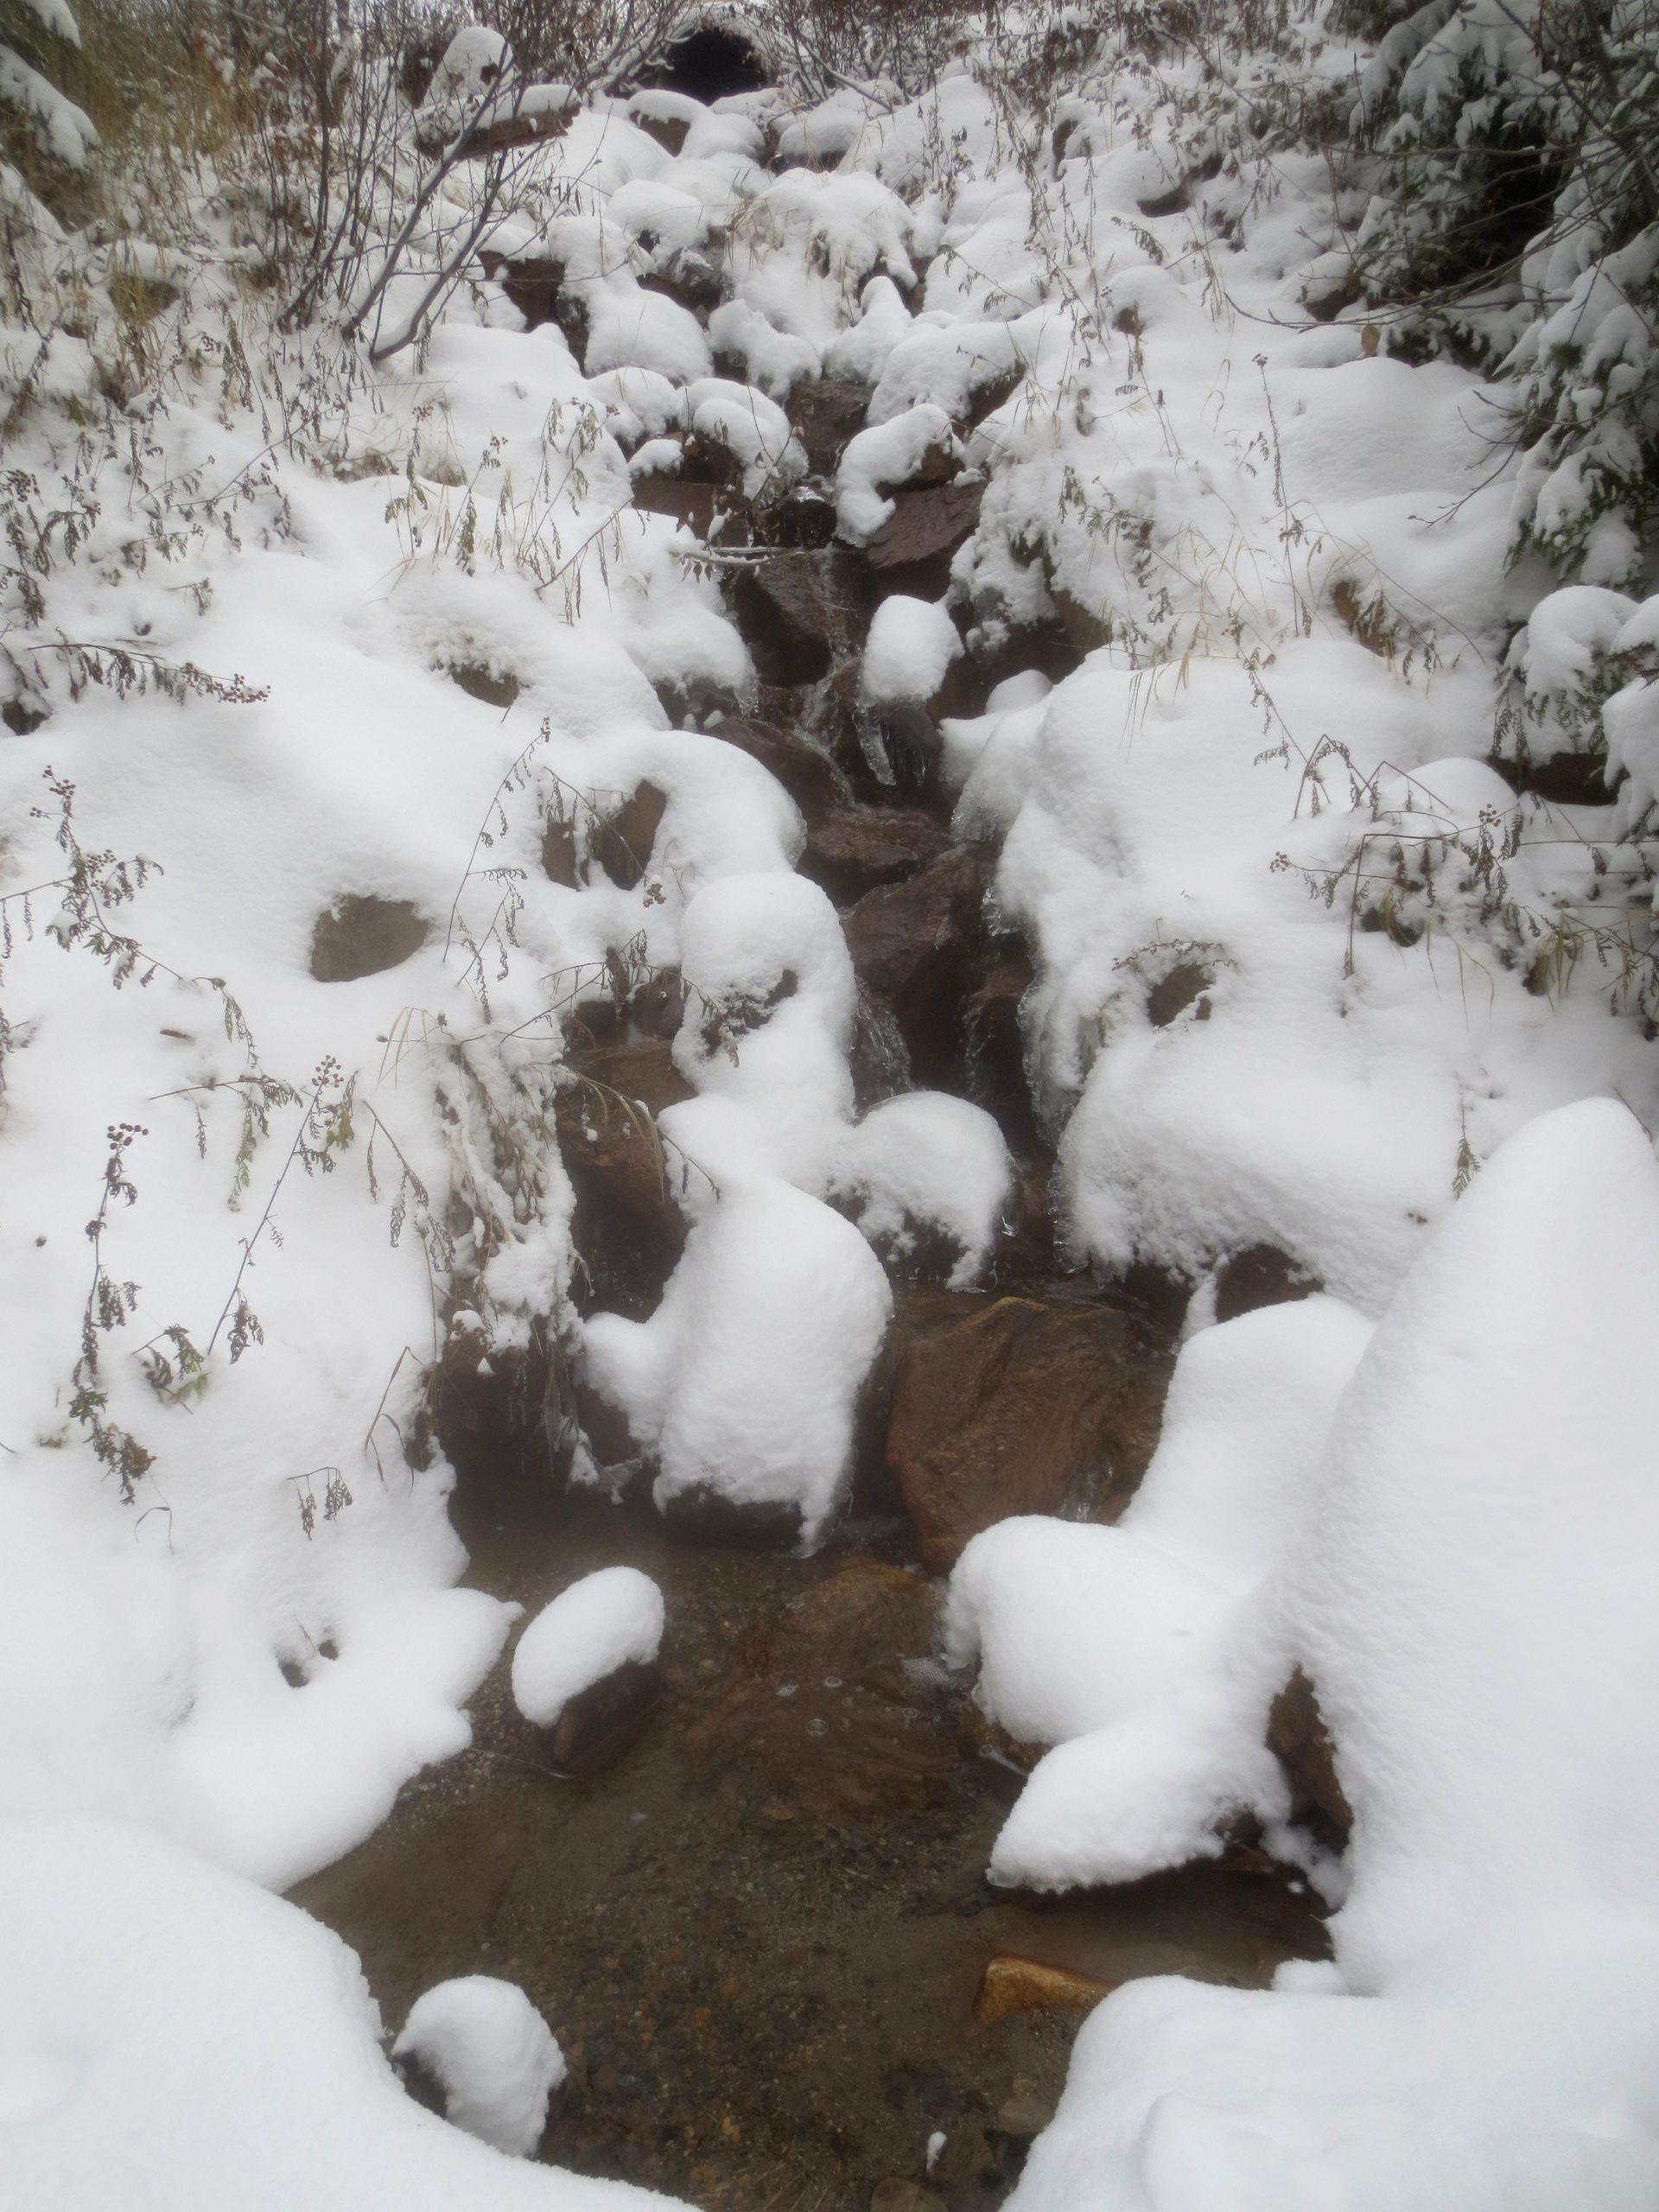 creek running down the side of a hill with snow covered banks and ice forming on rocks